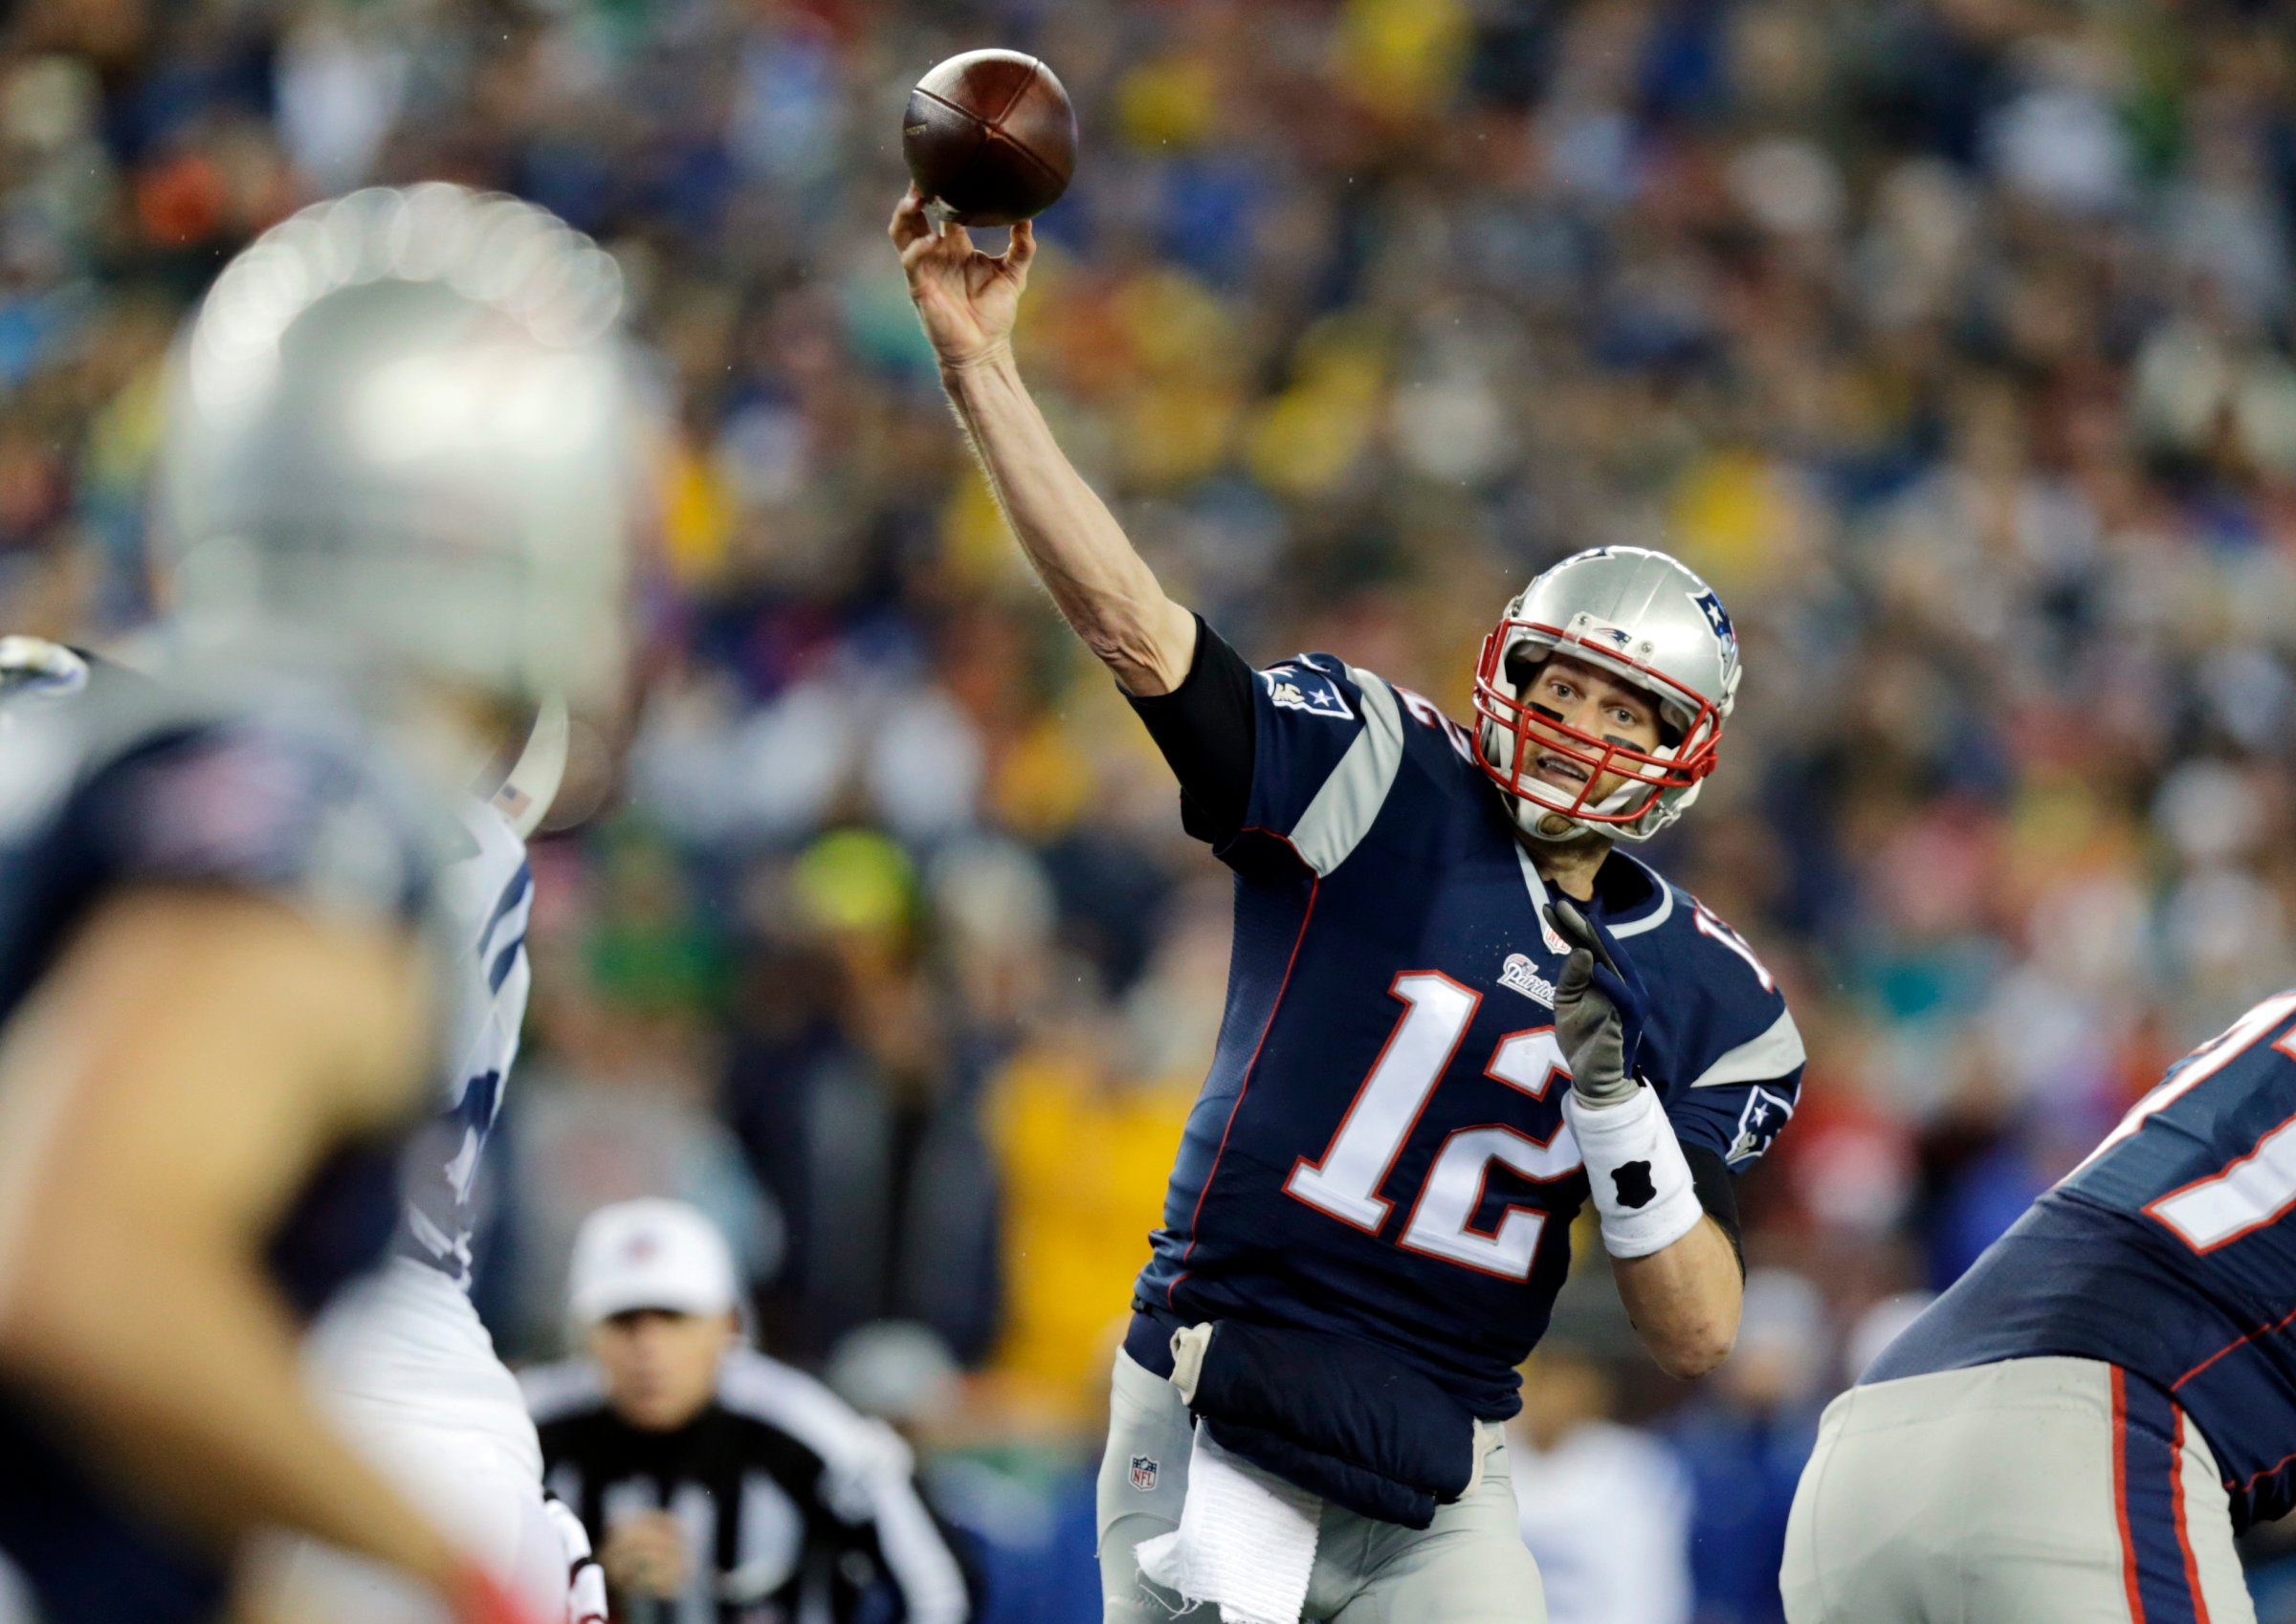 New England Patriots quarterback Tom Brady throws a pass during the first half of the AFC championship NFL football game against the Indianapolis Colts in Foxborough, Mass on Jan. 18, 2015.